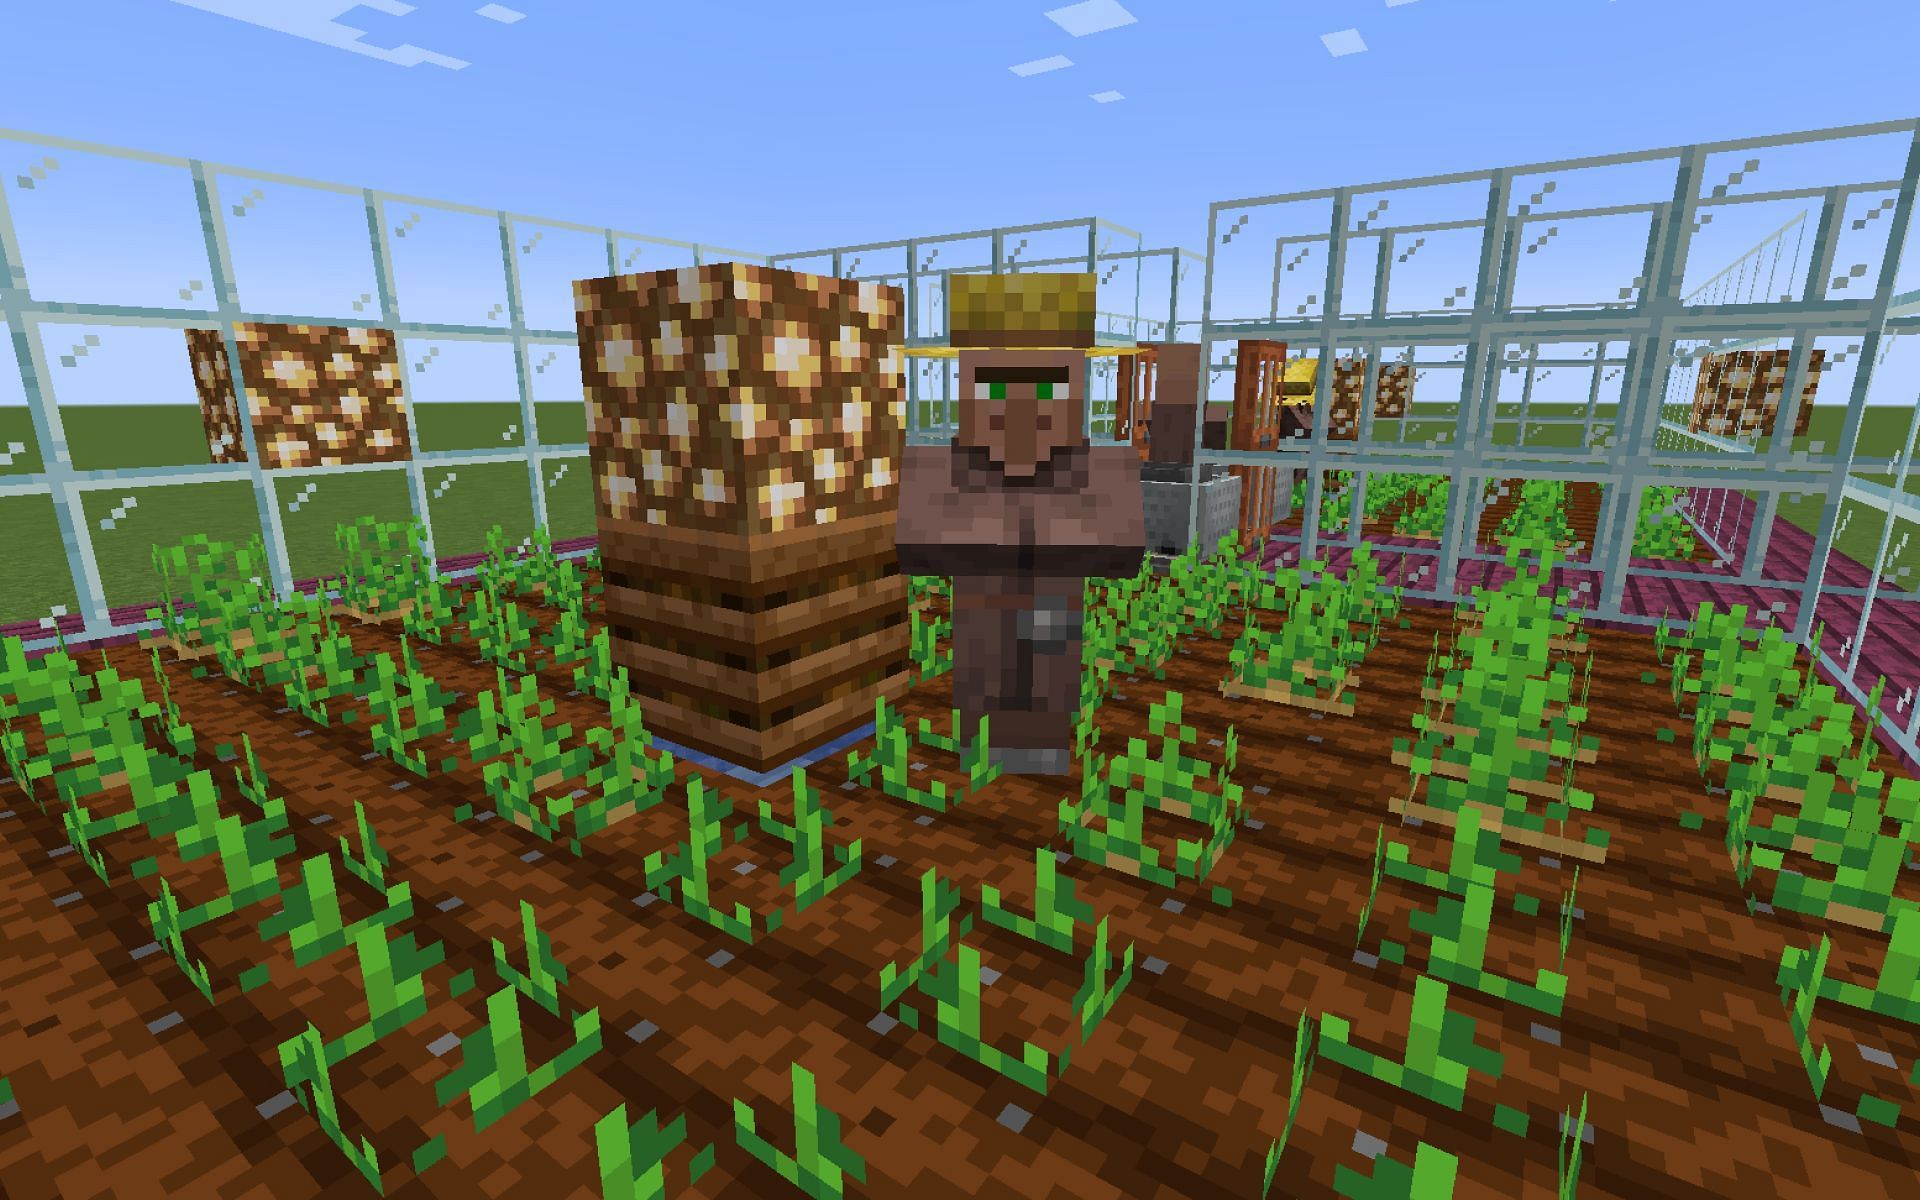 Villager crop farms are an excellent addition to any Minecraft base. (Image via Minecraft)